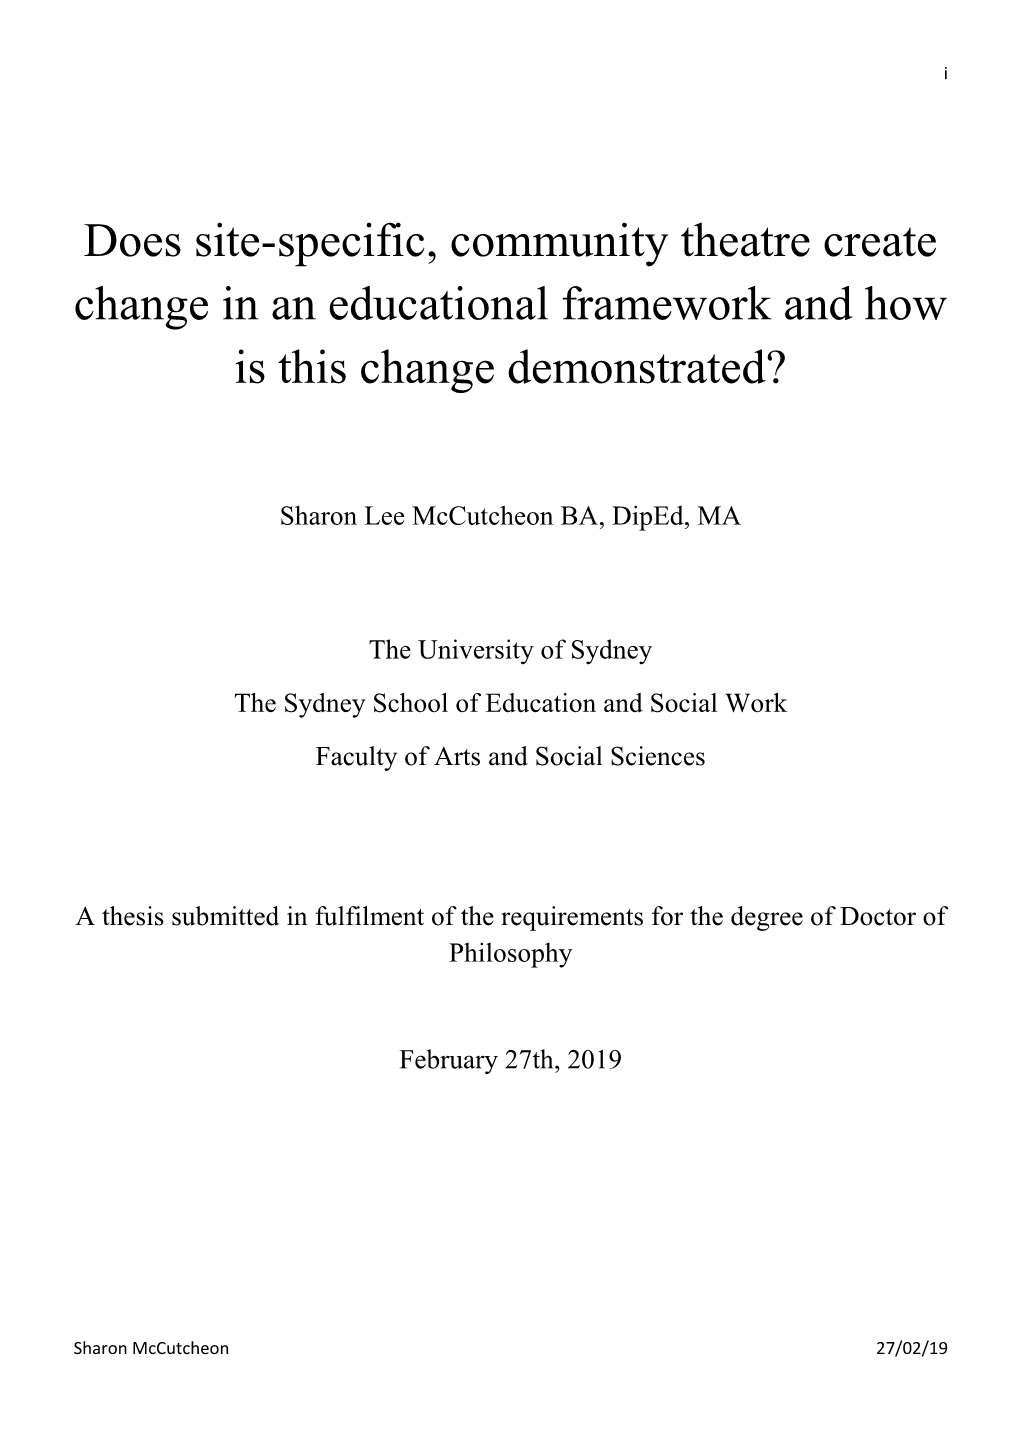 Does Site-Specific, Community Theatre Create Change in an Educational Framework and How Is This Change Demonstrated?